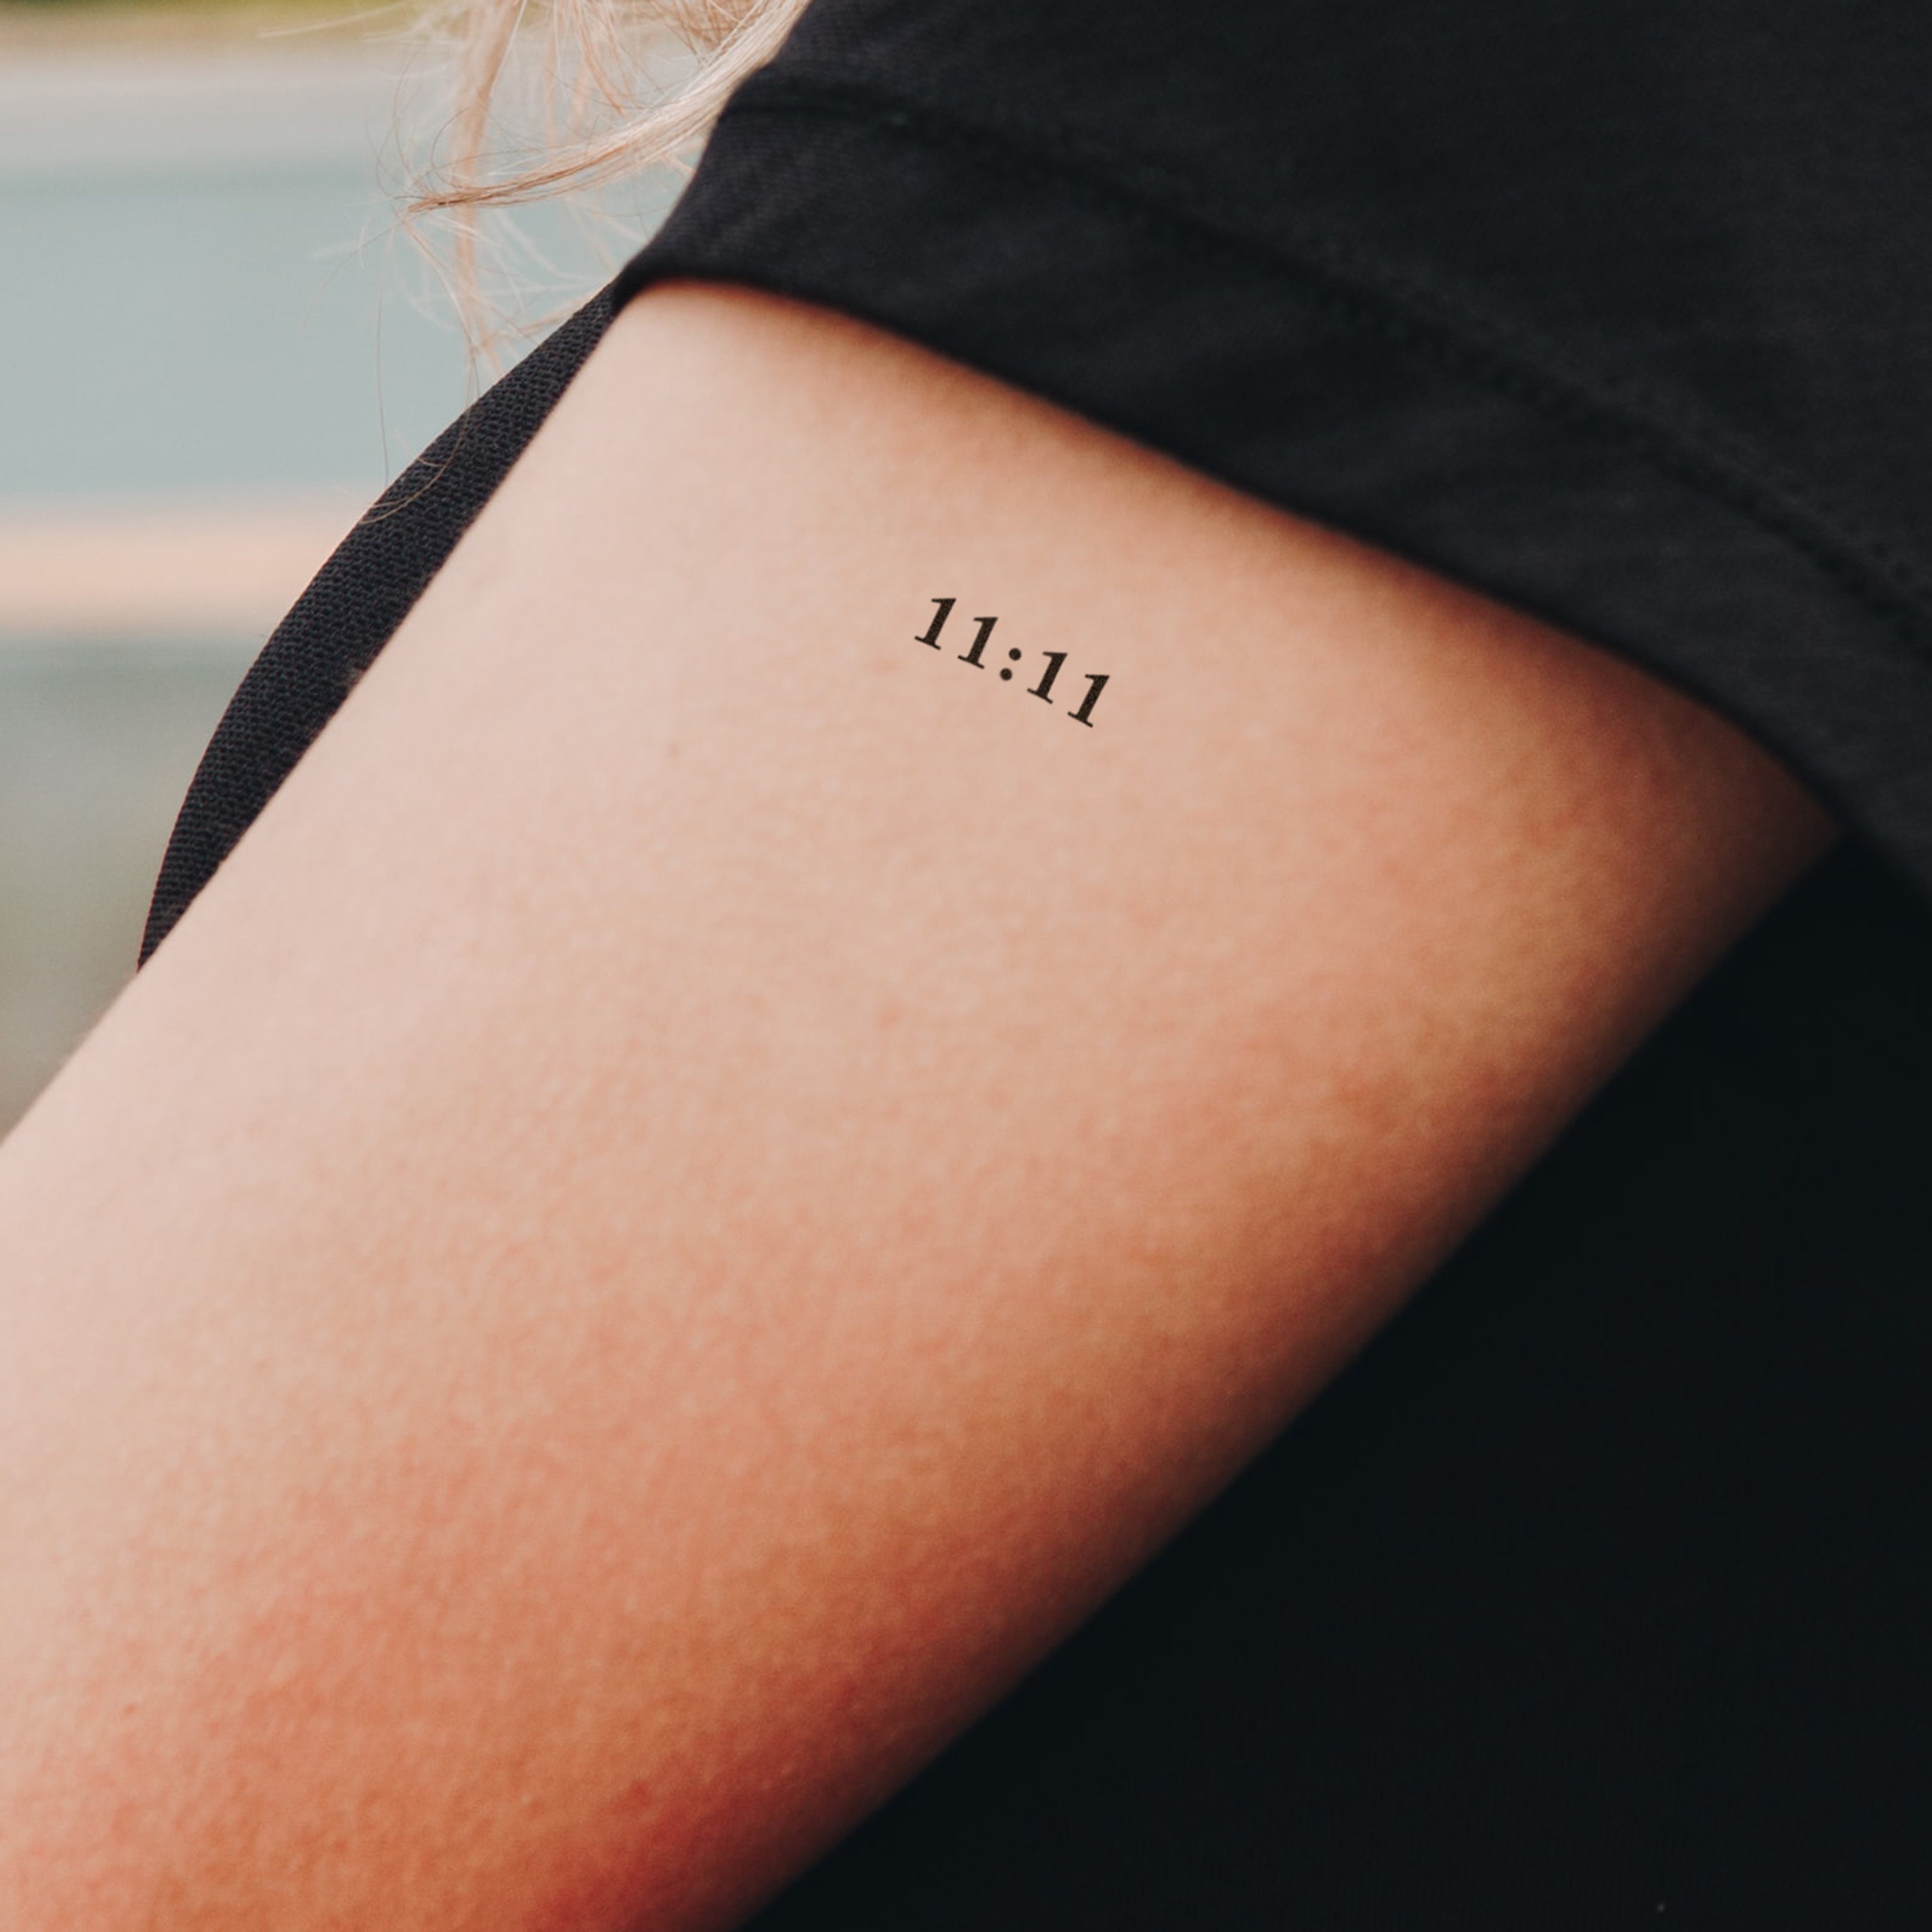 11 11 Meaning Do You Keep Seeing This Unusual Number  1111 tattoo  ideas 11 11 tattoo 11 11 meaning